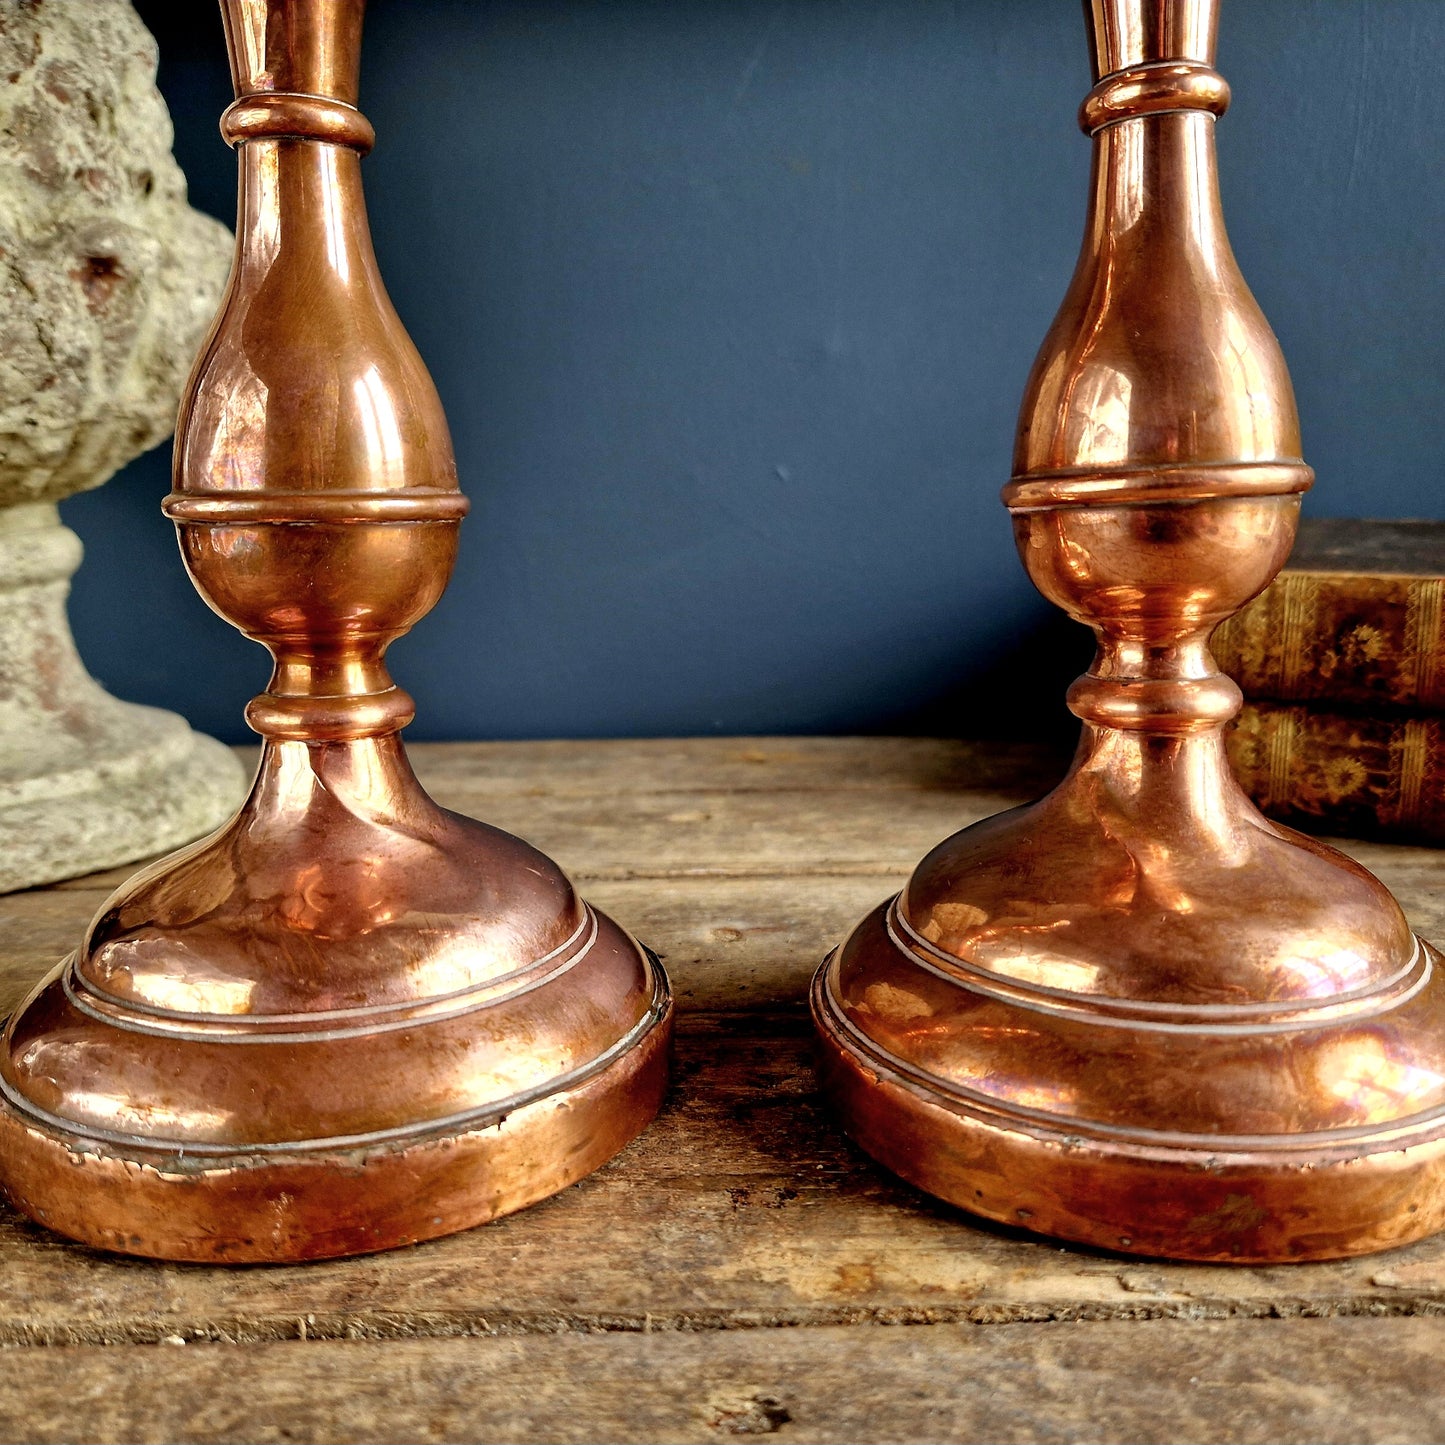 Pair of antique copper candlesticks. French copper candle holders